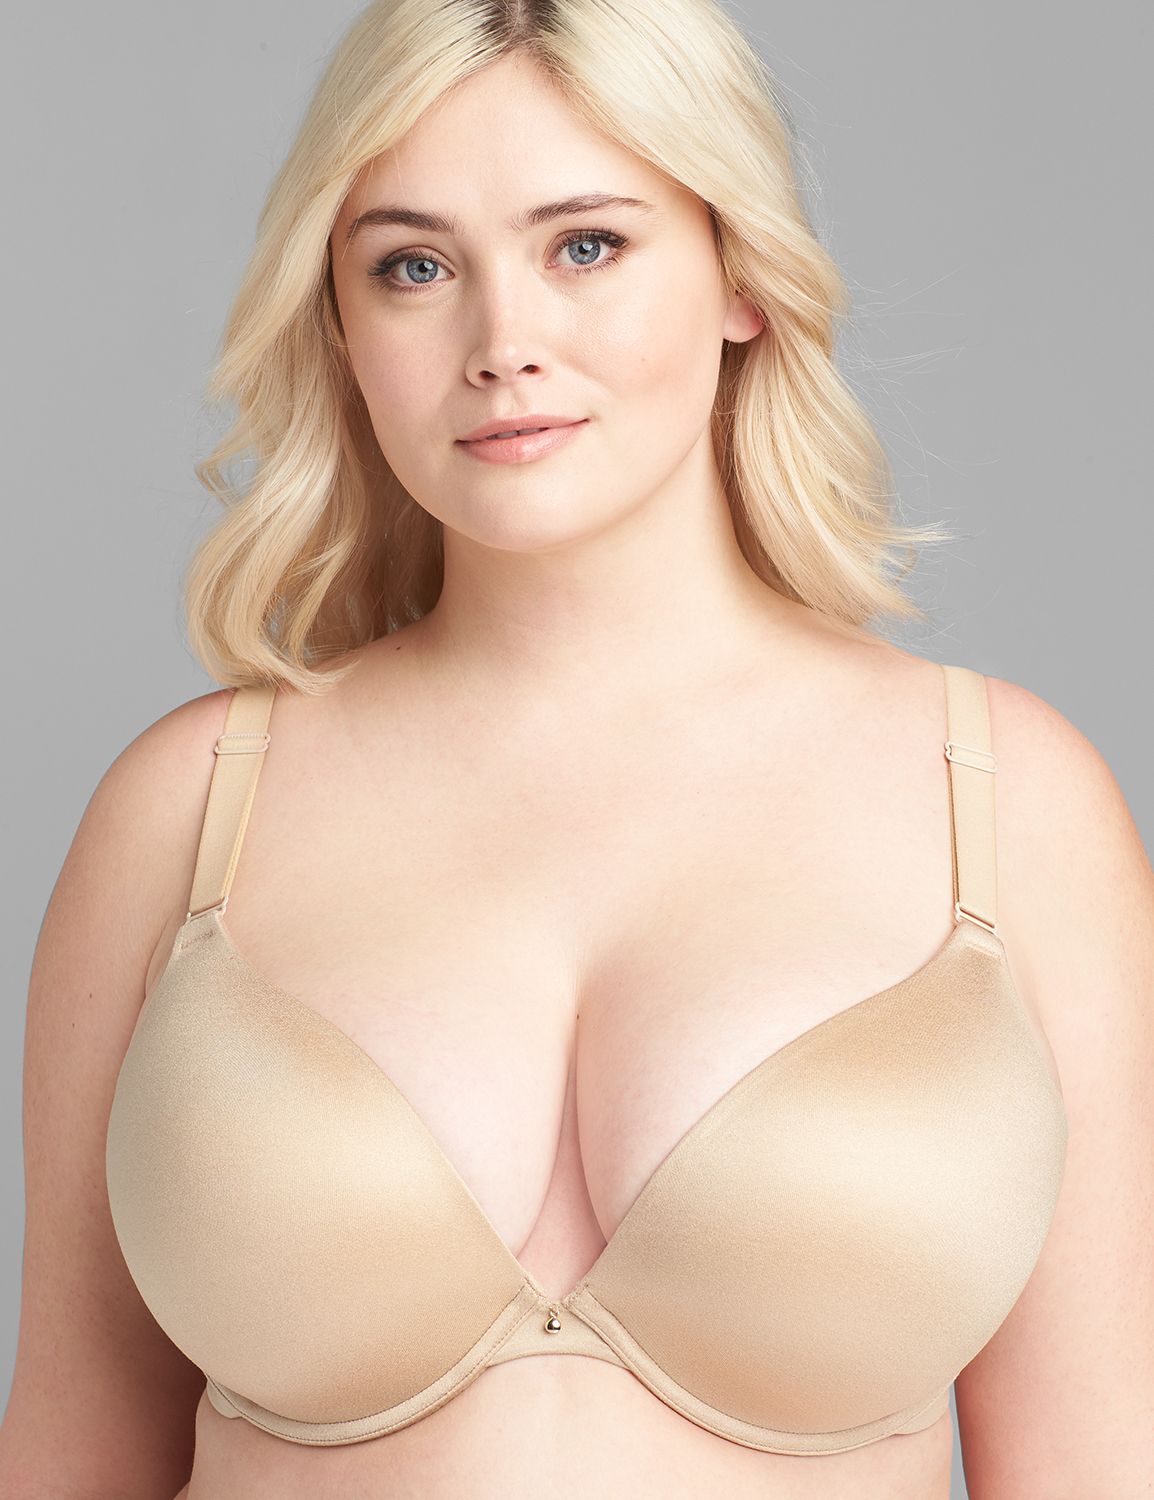 Lane Bryant - We believe there are no wrong size boobs. Just wrong